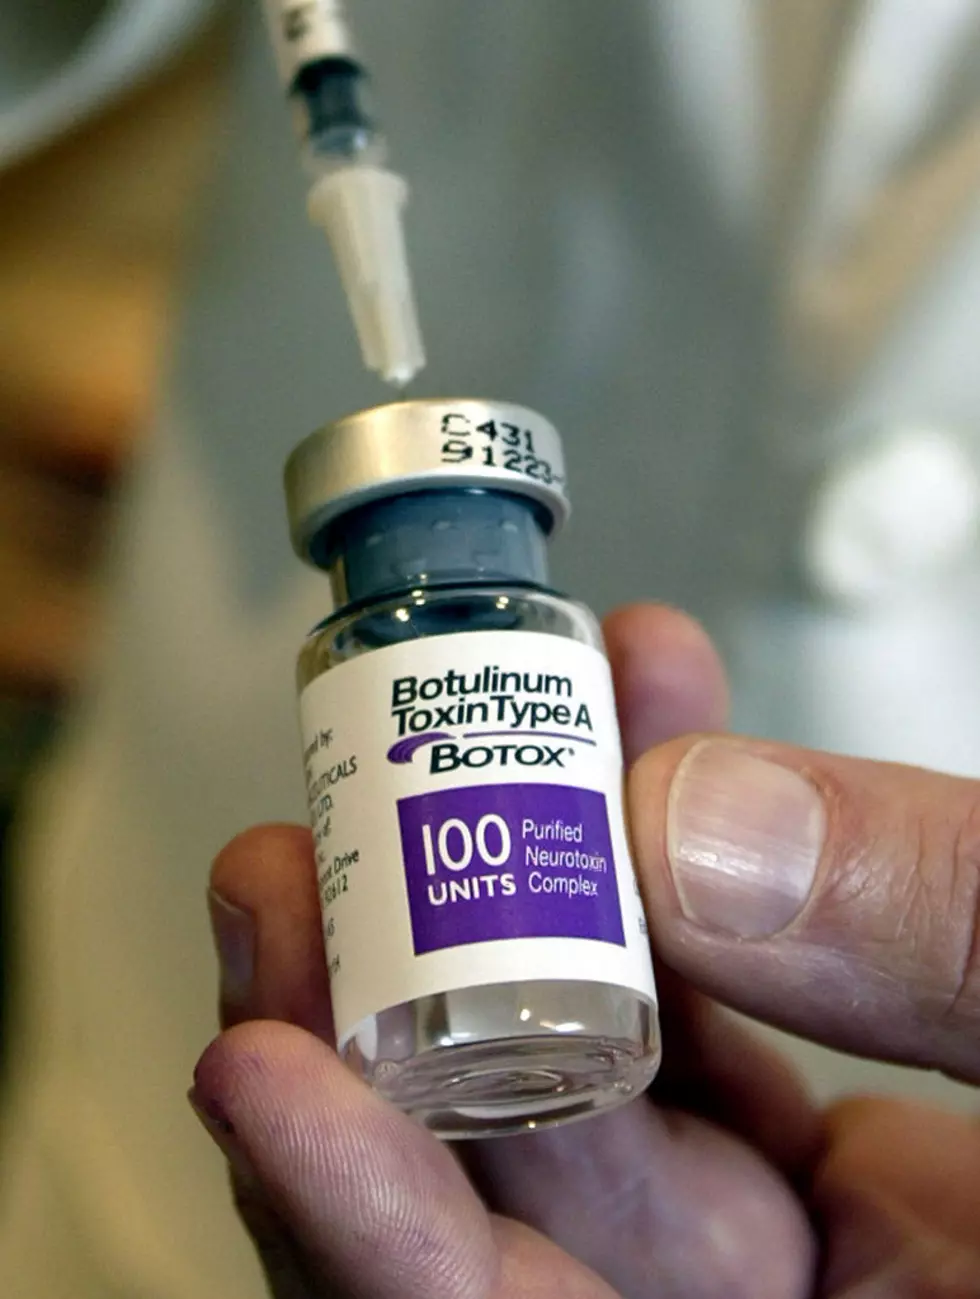 Counterfeit Botox In Texas Sending People To The Hospital